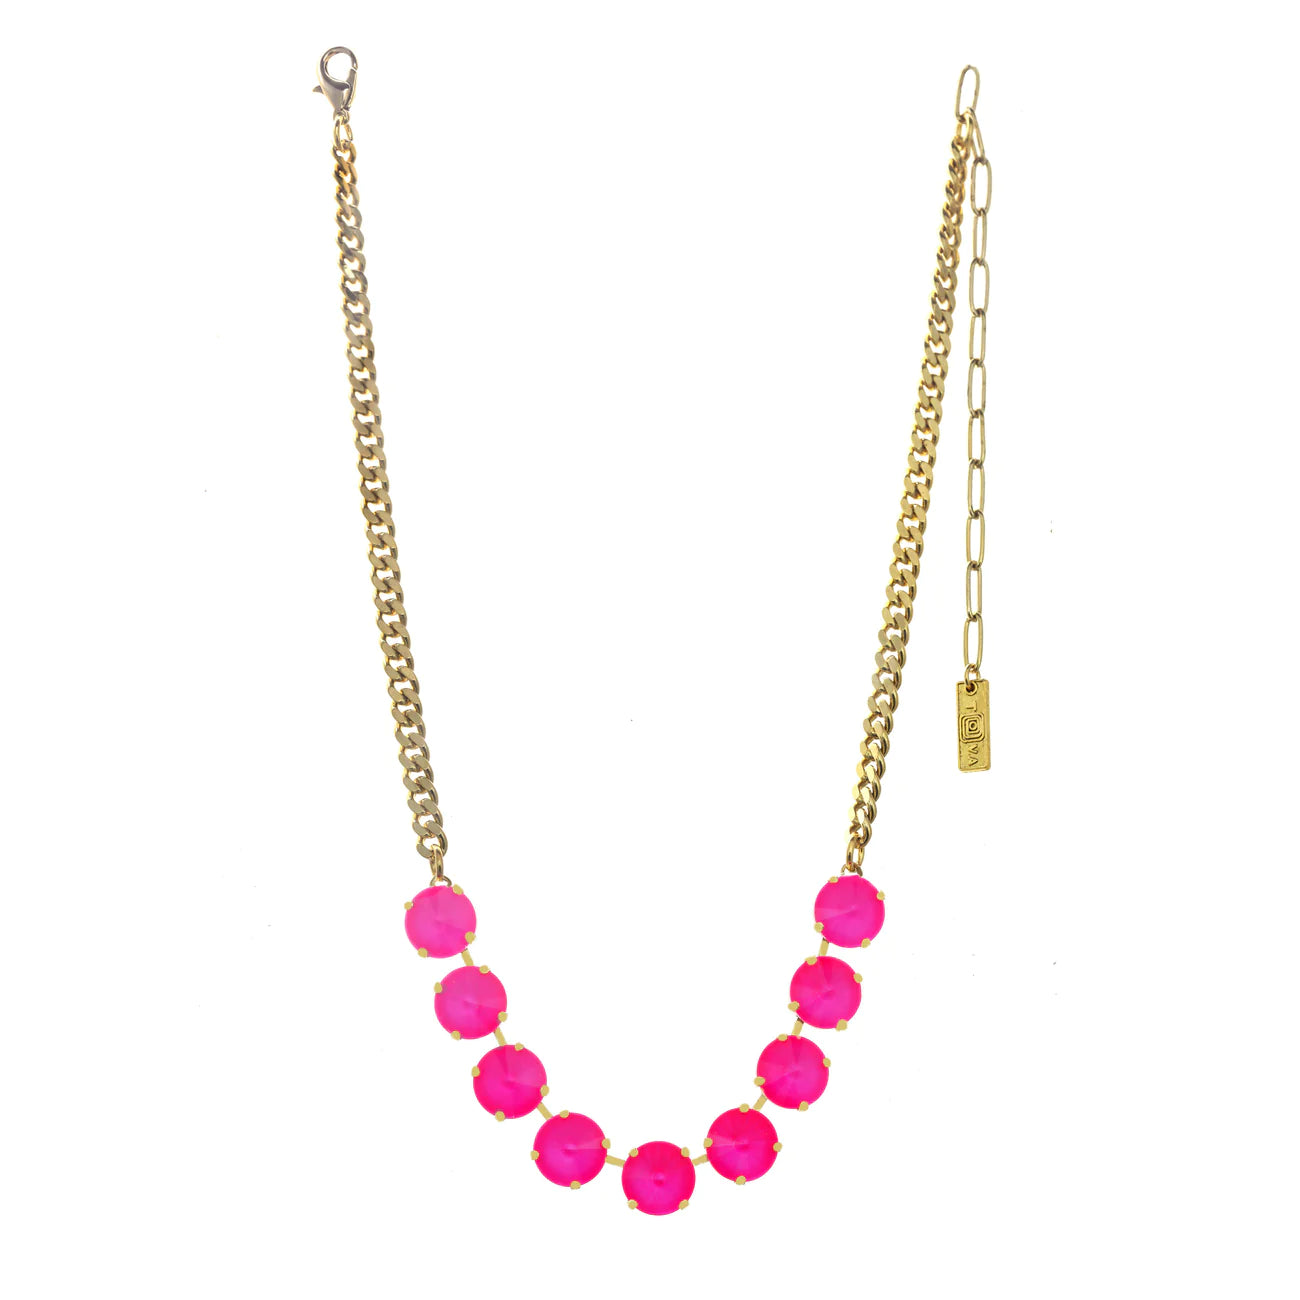 MINI SOFIA NECKLACE IN ELECTRIC PINK